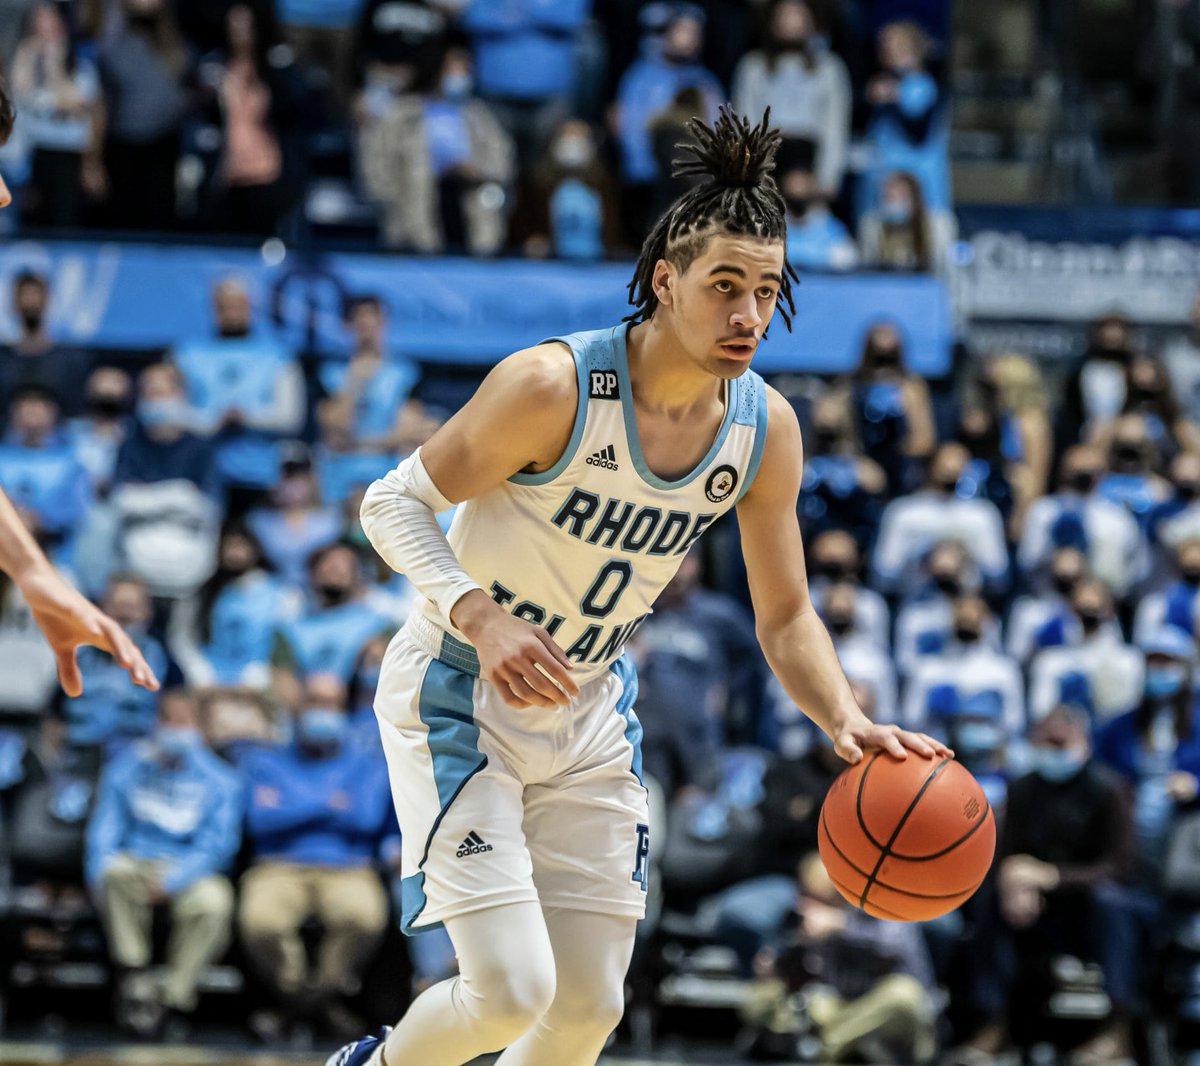 Albany transfer and All-America East 2nd Team selection Sebastian Thomas is returning to Rhode Island. The 6’1” junior guard from Providence RI, started 32/32 games averaging 19.6 points, 4.2 rebounds, 4.9 assists, and 1.9 steals. Played his first two seasons at Rhode Island